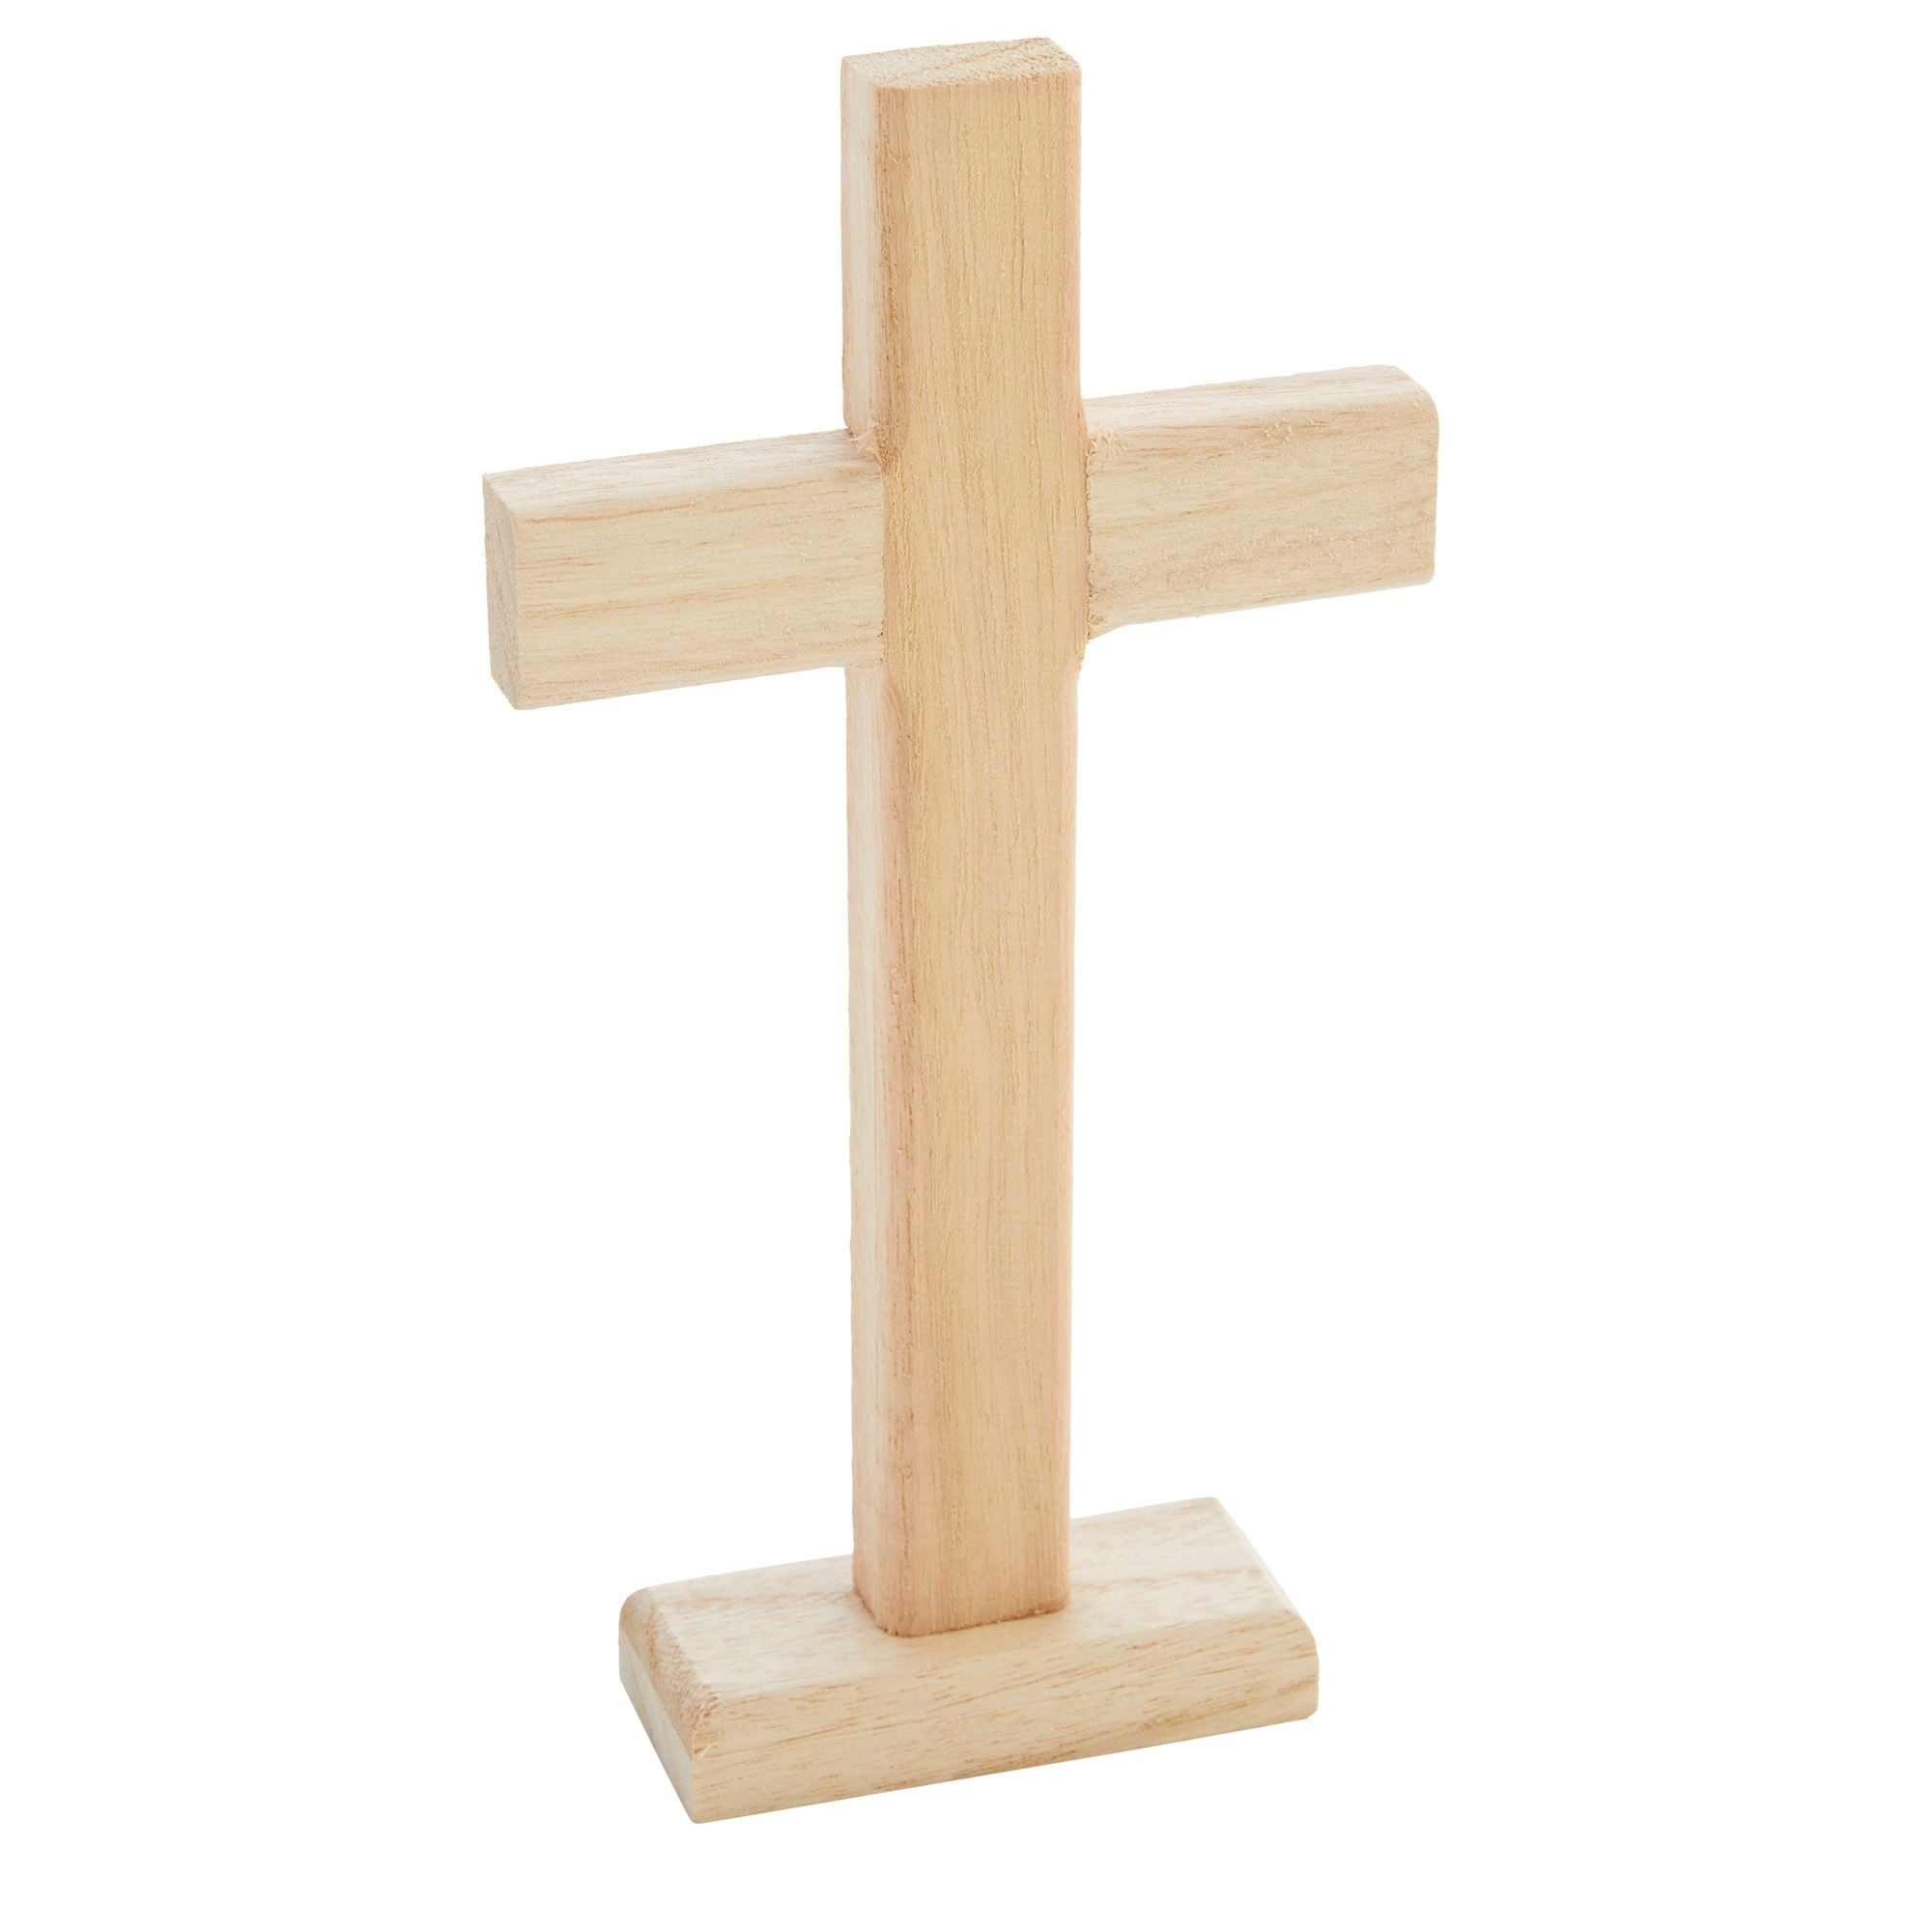 Painted and wood burned cross for sale on  $10 Plain wood crosses to  decorate also available at DIY greek